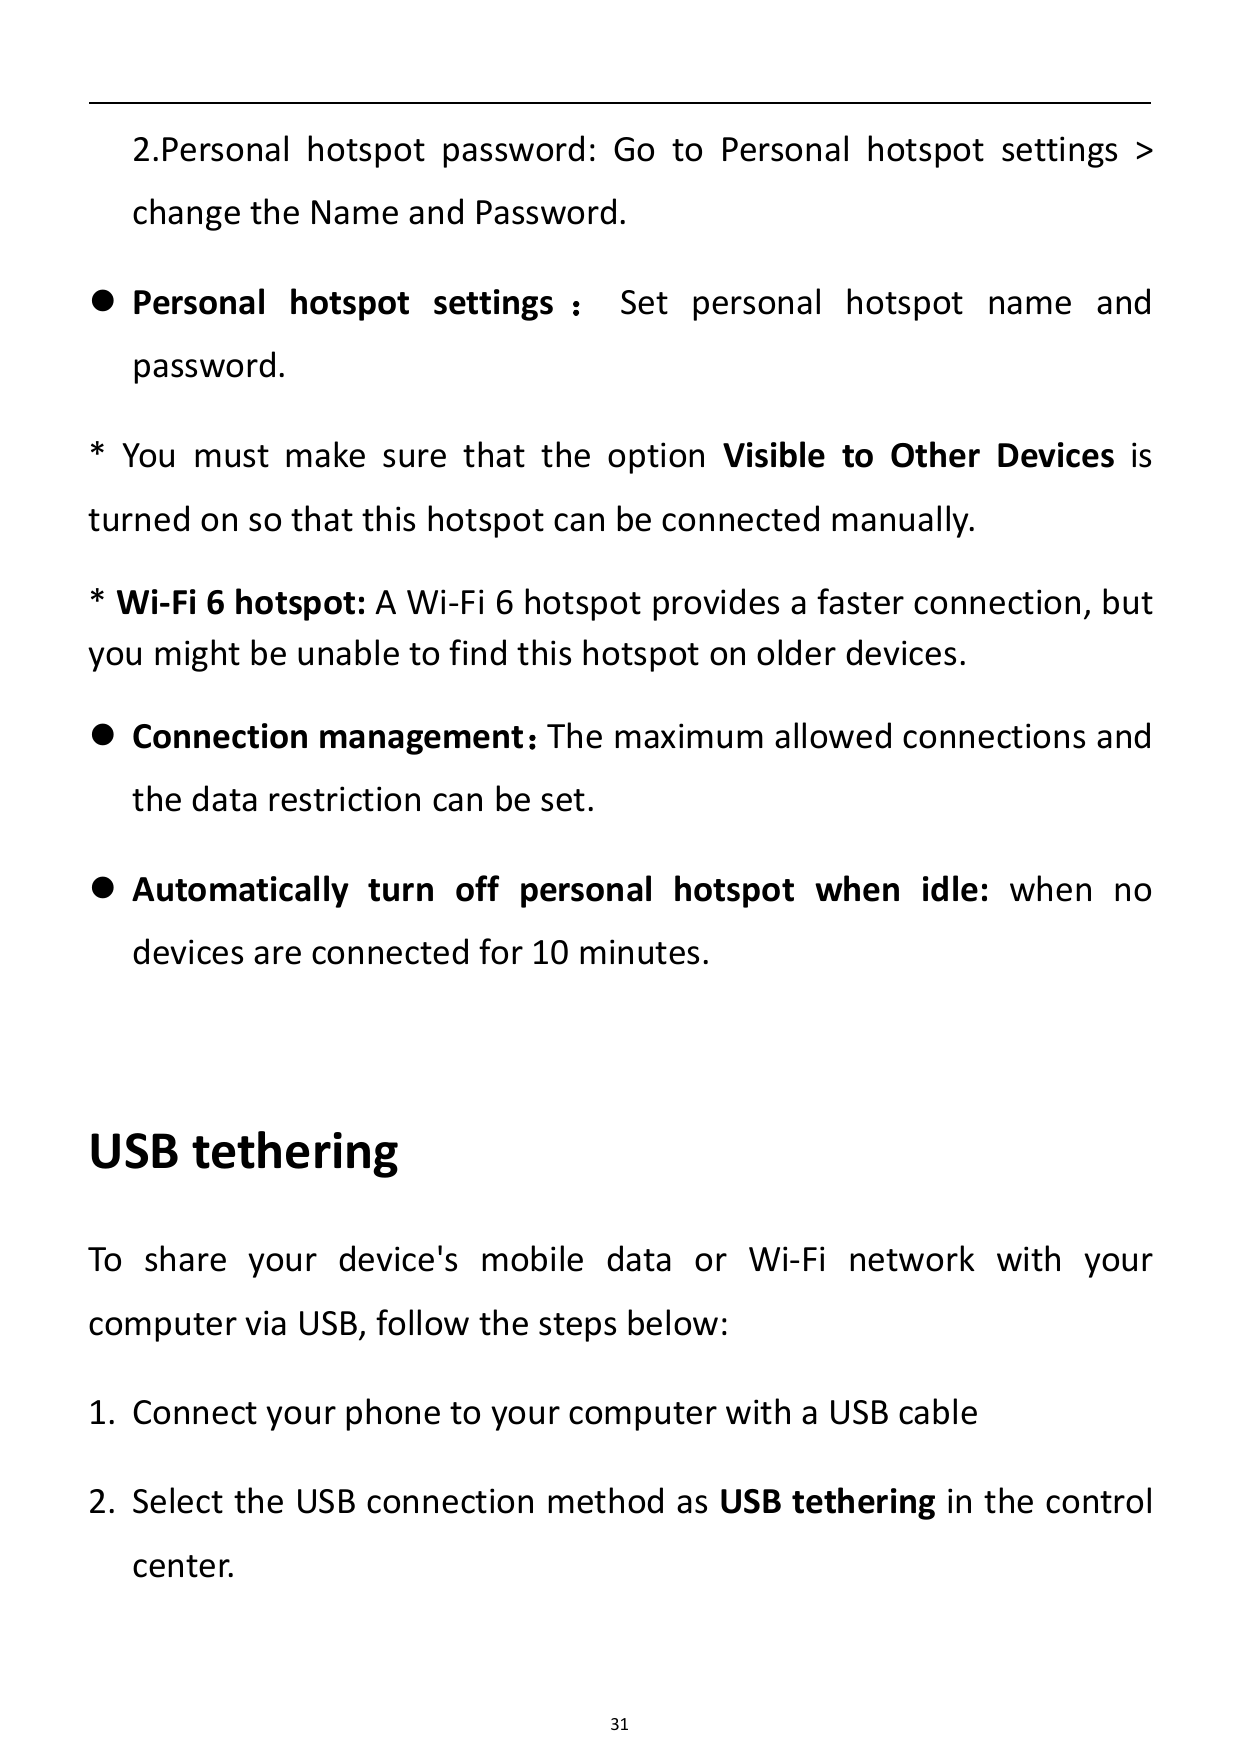 2.Personal hotspot password: Go to Personal hotspot settings >change the Name and Password. Personal hotspot settings ： Set per